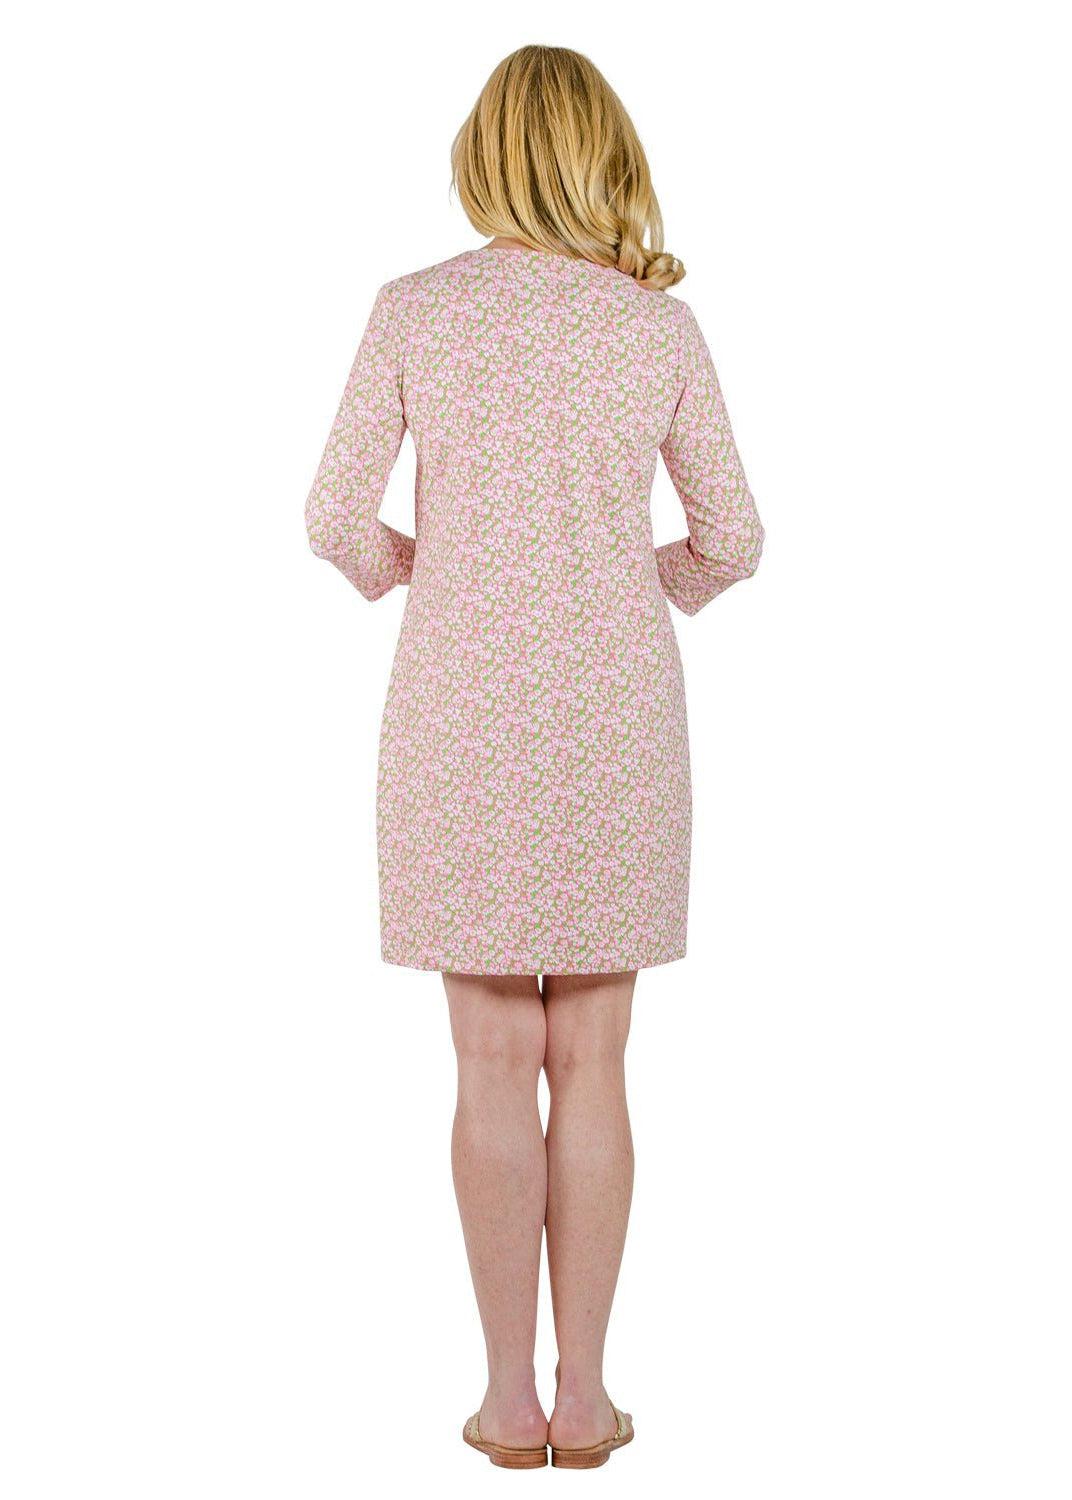 Lucille Dress 3/4-Tiny Floral Pink/Green-FINAL SALE-2